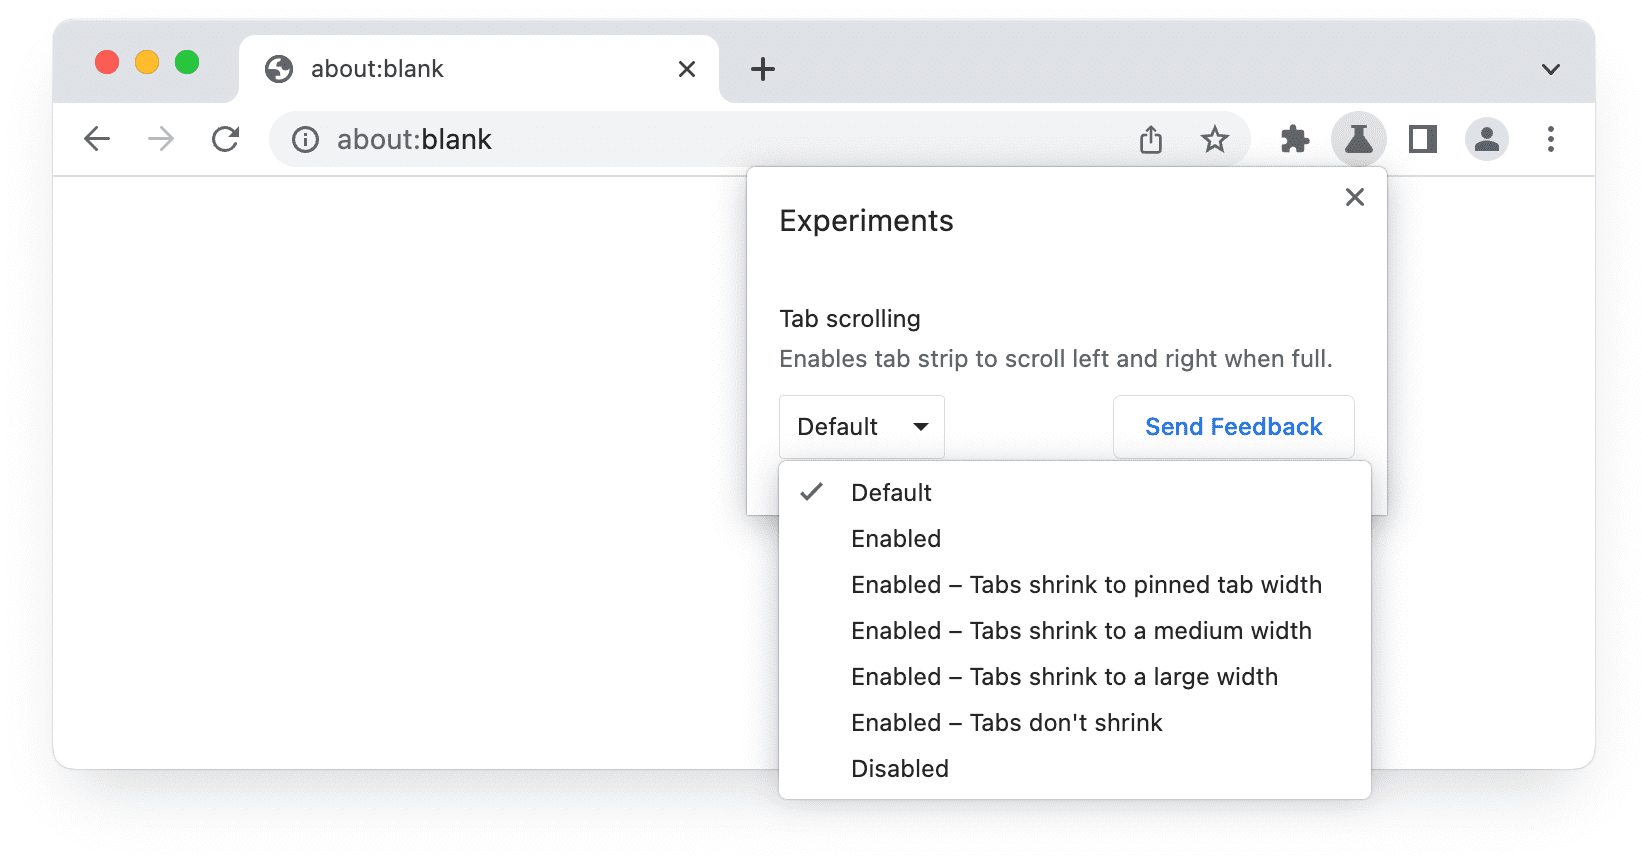 Screenshot of Experiments UI in Chrome Beta, showing Tab scrolling options.